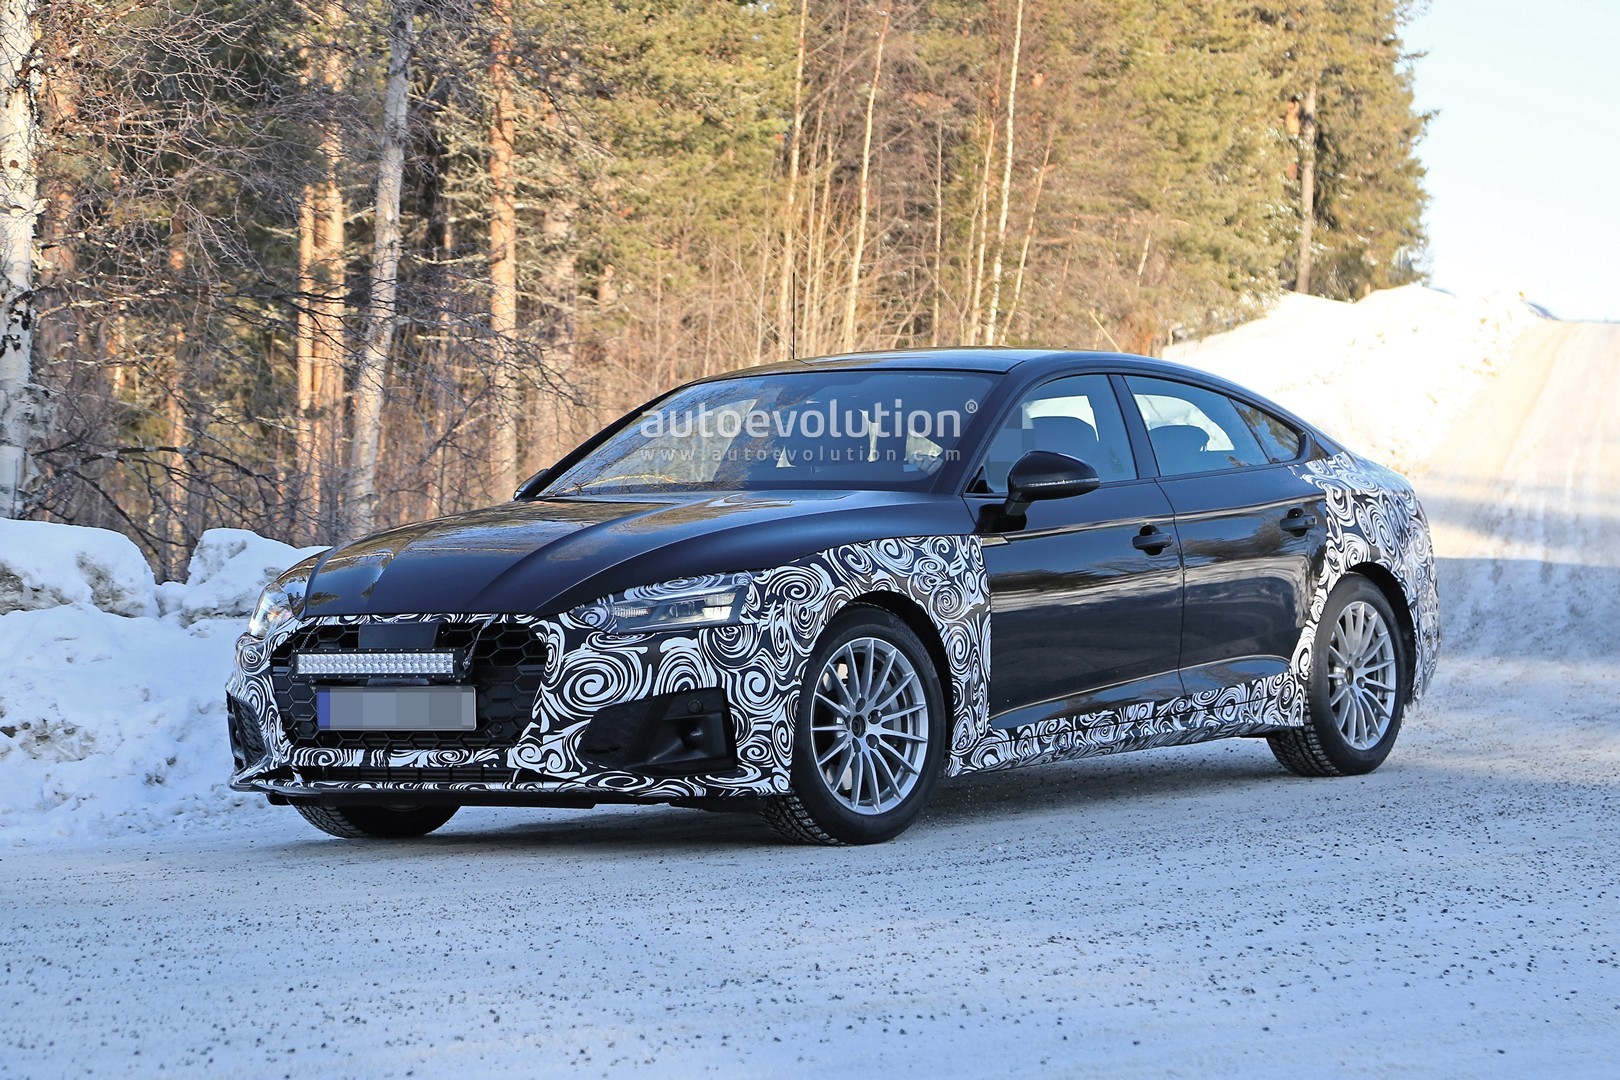 2020 Audi A5 Sportback Spied With New Lights, Is Going ...